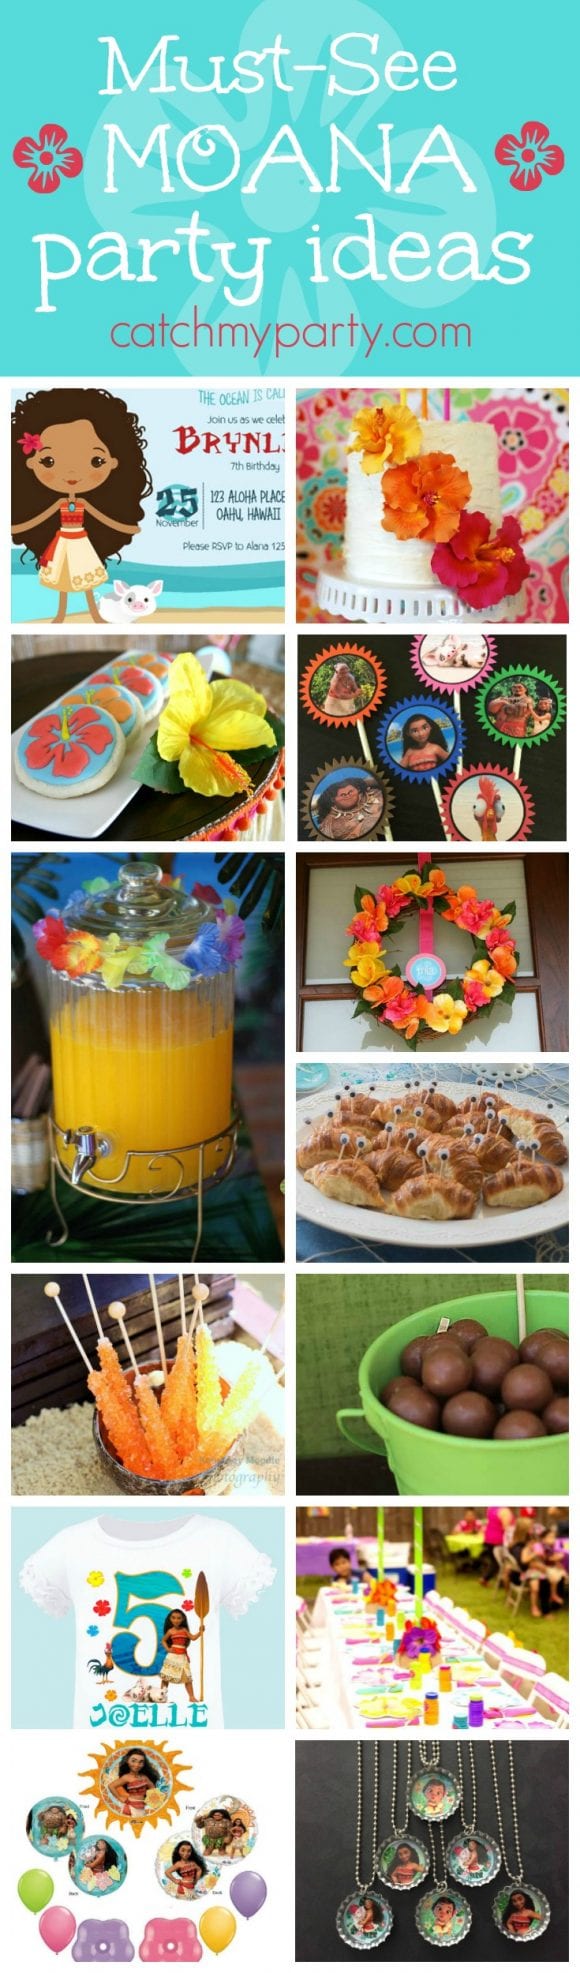 Must-see Moana party ideas | CatchMyParty.com